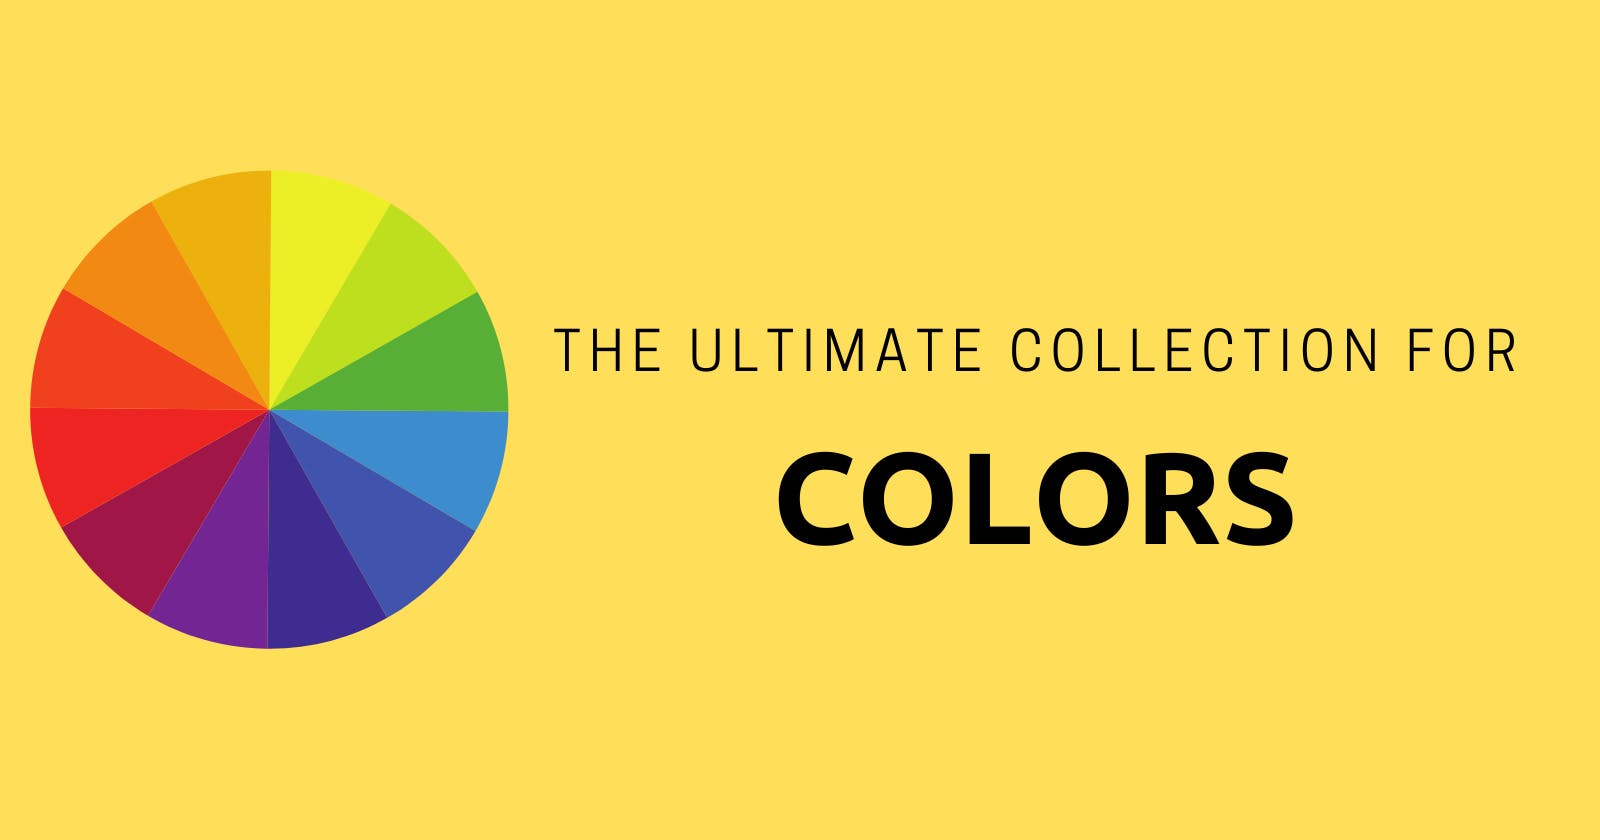 The Ultimate Collection of Colors for UI 😎